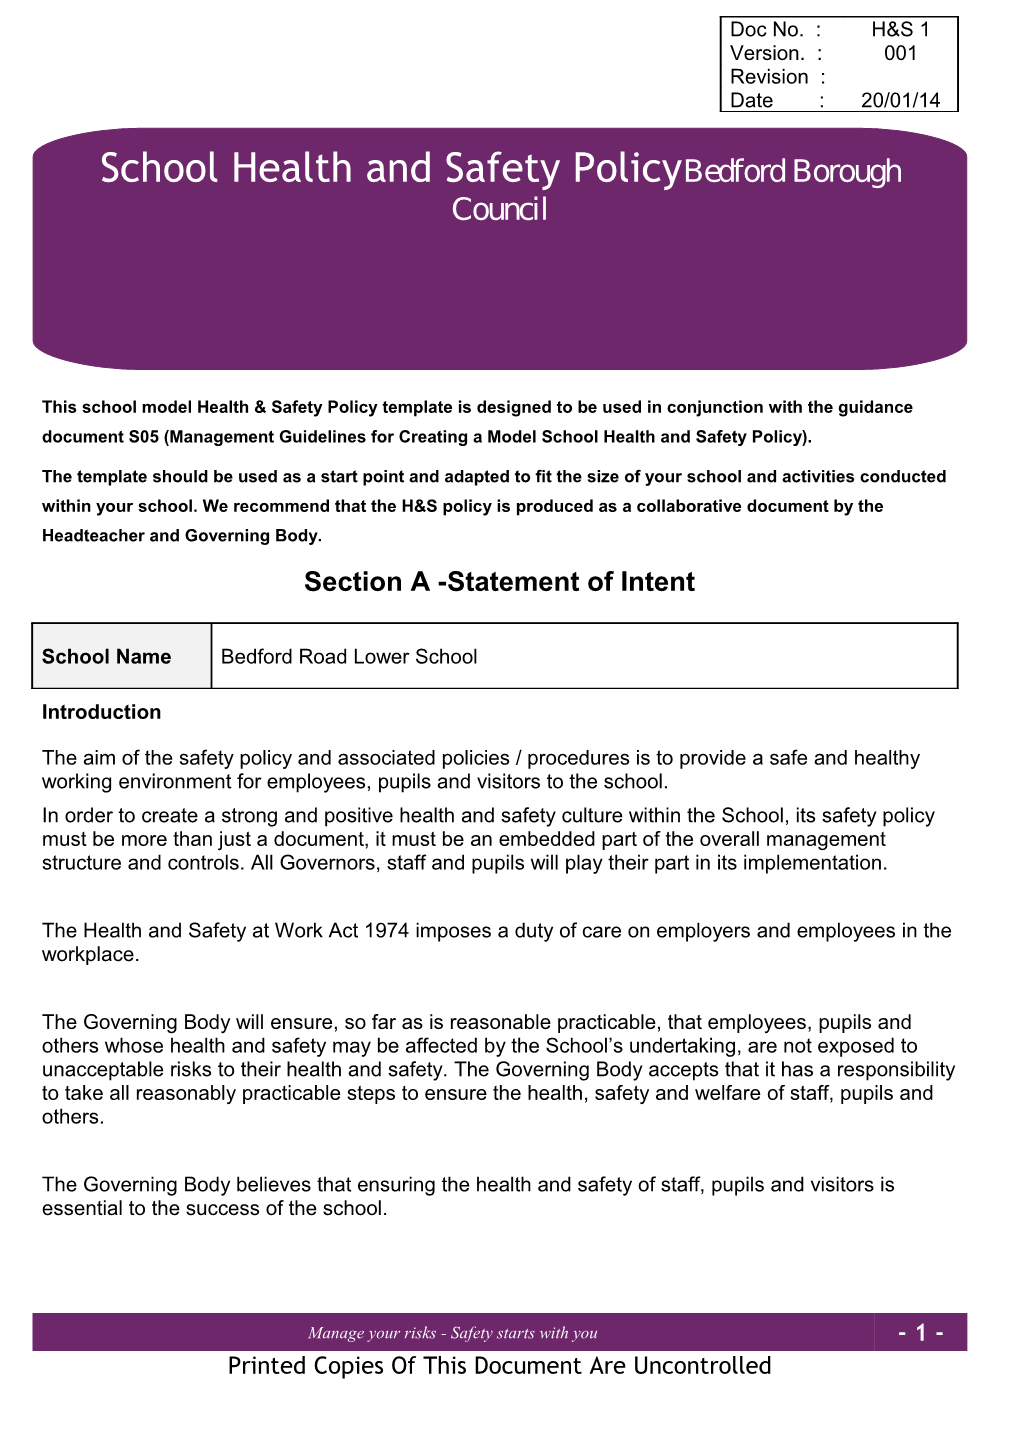 This School Model Health Safety Policy Template Is Designed to Be Used in Conjunction